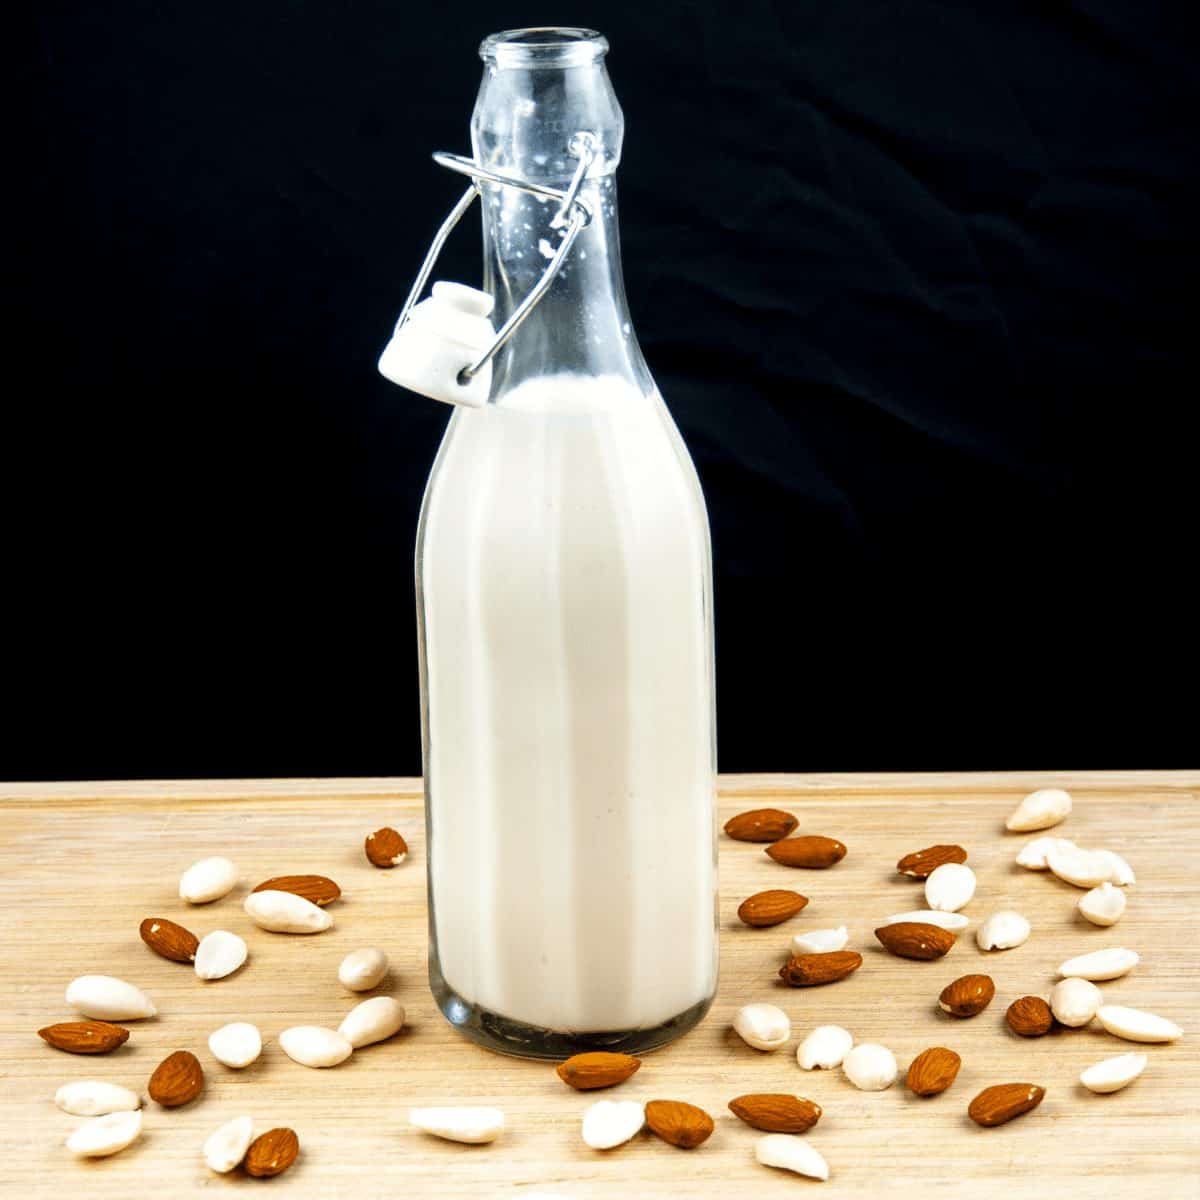 Ever wondered how to make your own almond milk? Believe me, it's easier than milking a cow! Diary free goodness in your own kitchen. And the kids can help too! | theyumyumclub.com